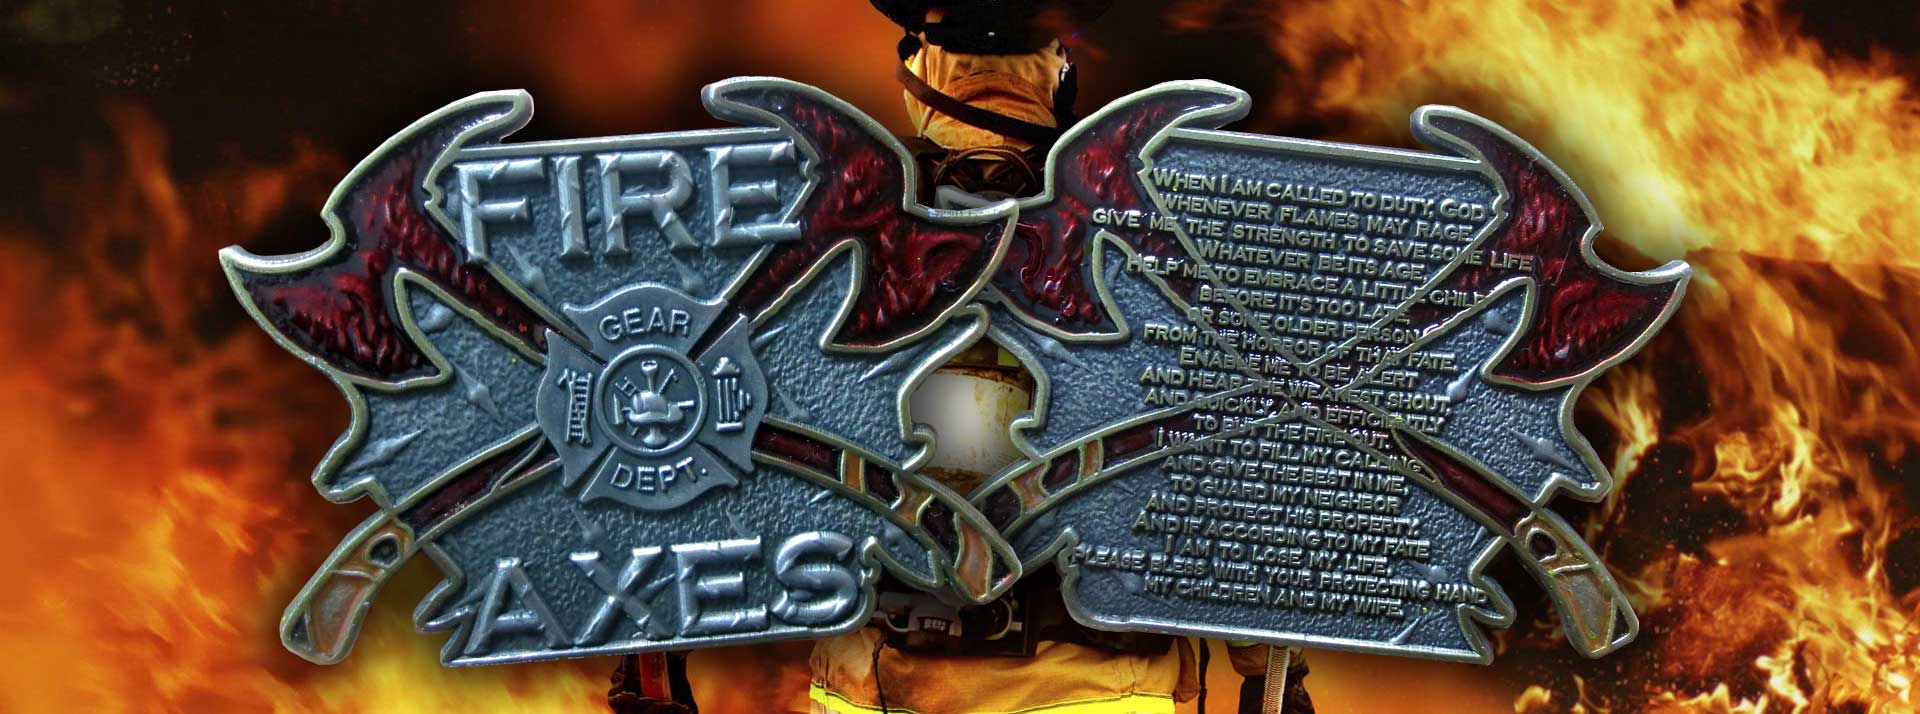 Fire and Axes Top Ten List of Firefighter Coins